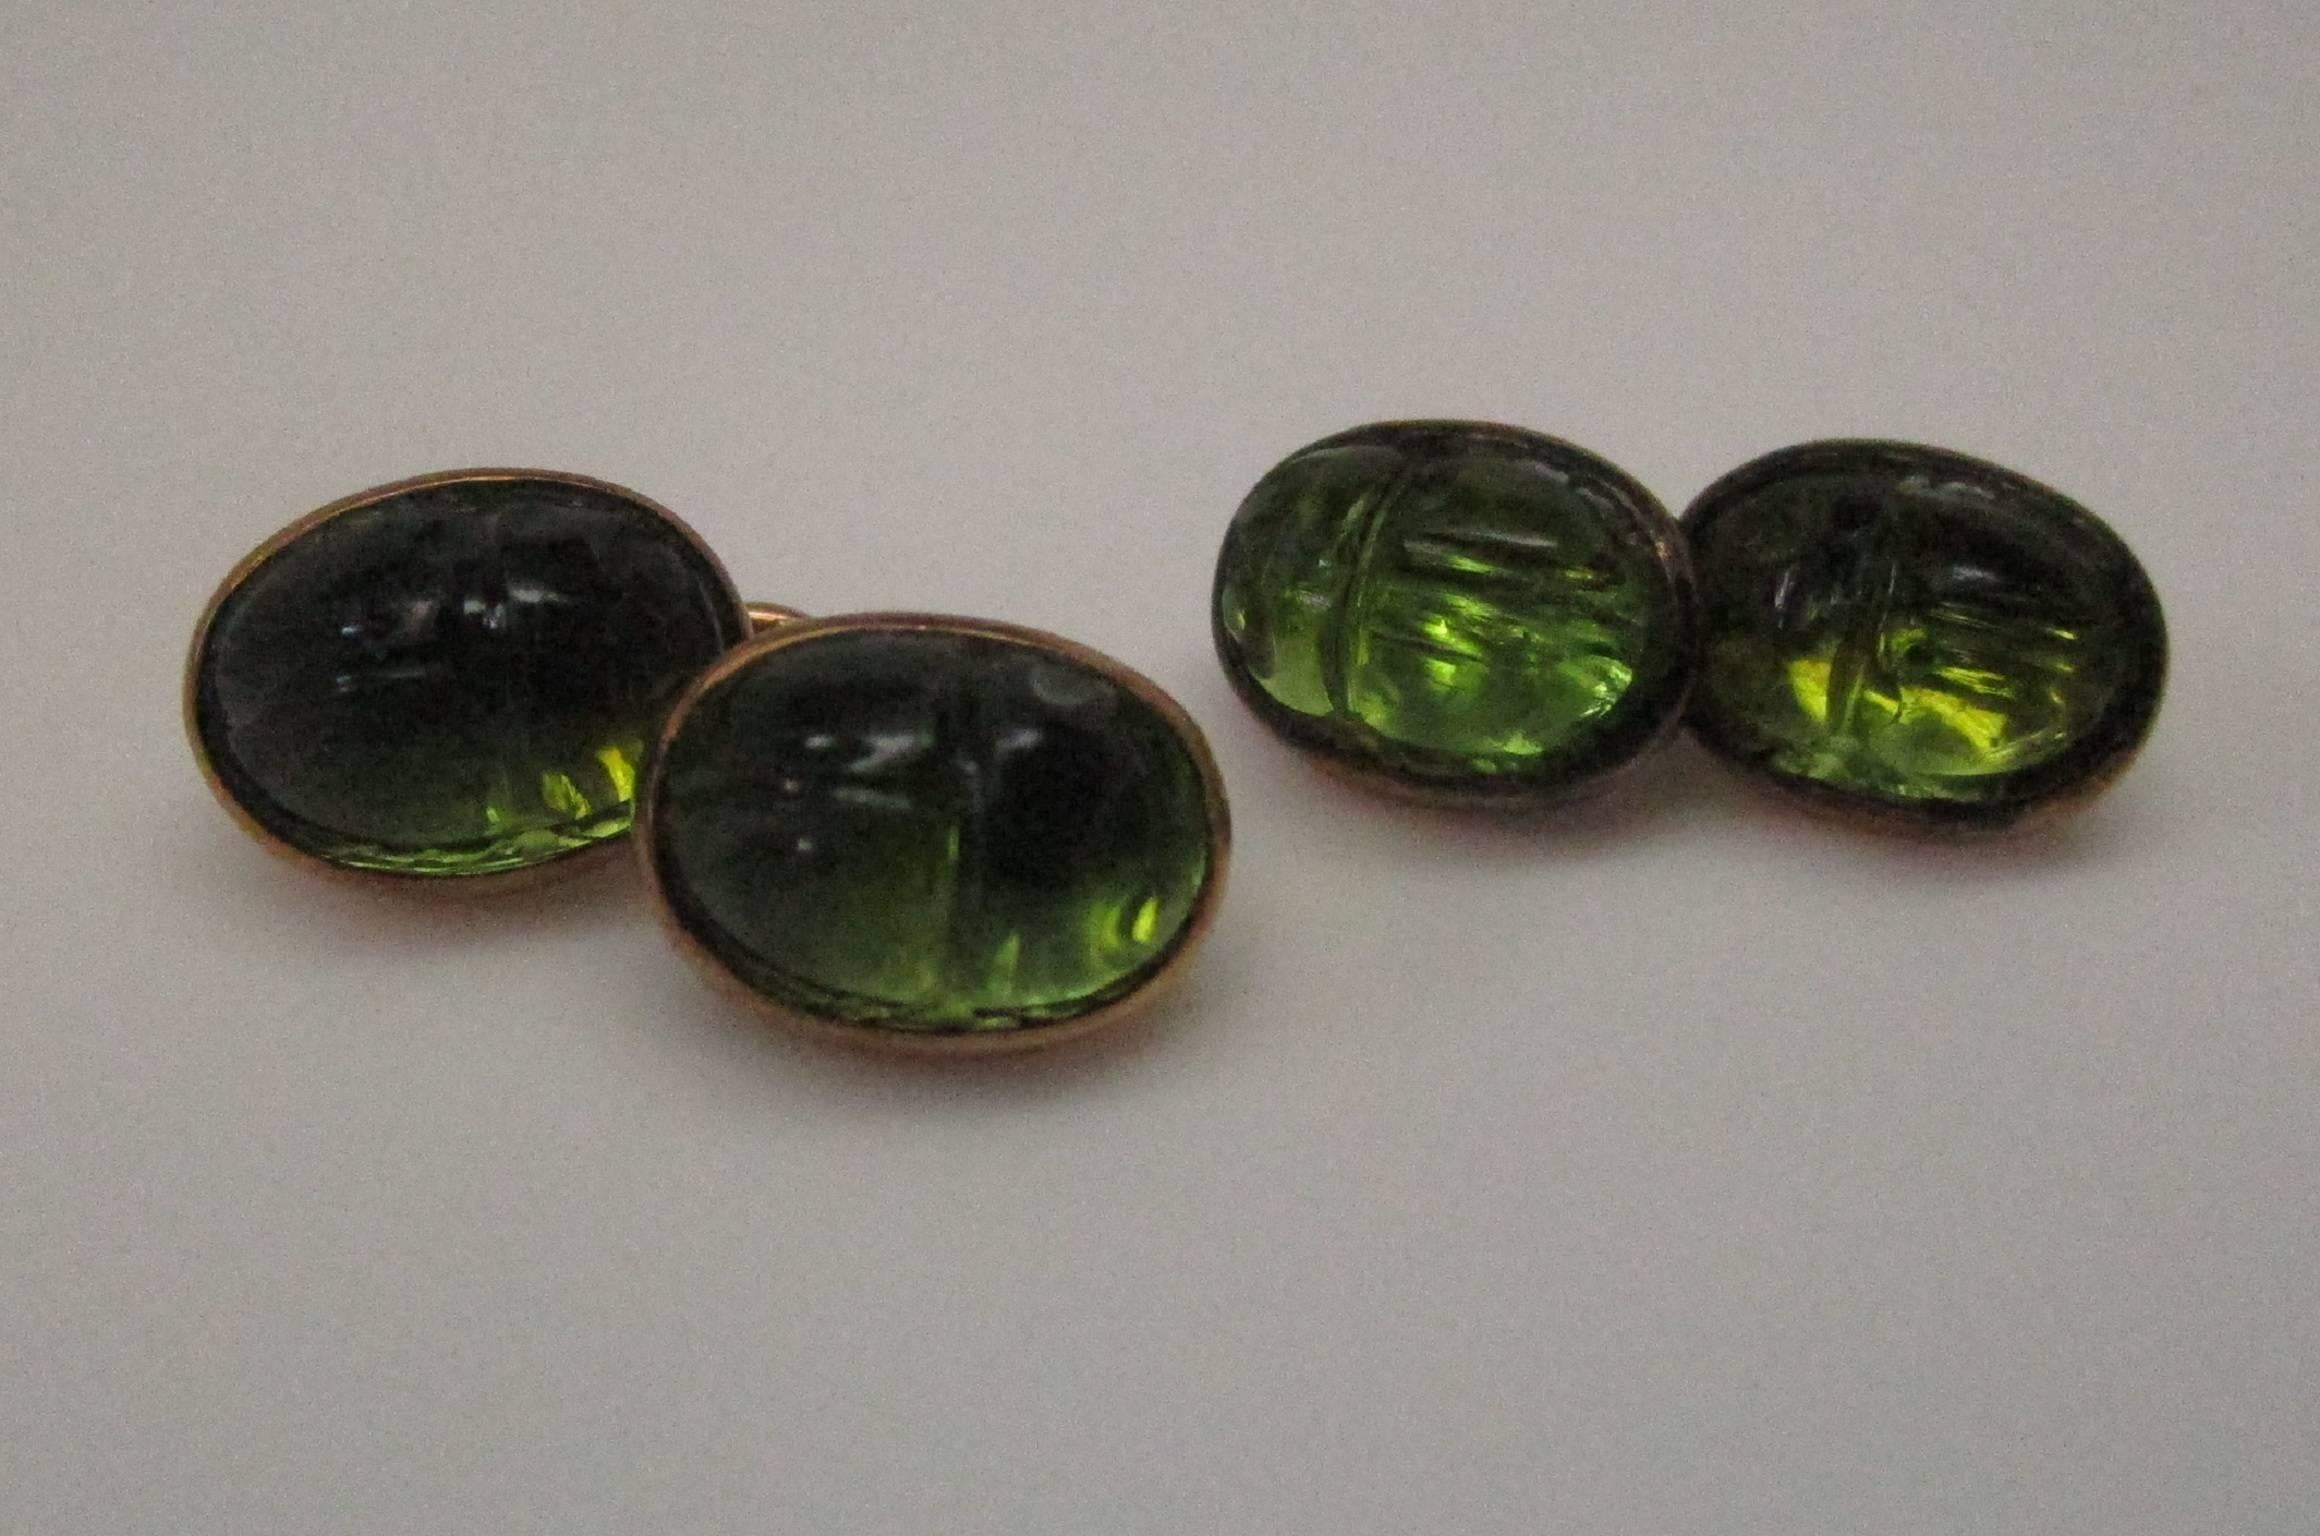 These are an exquisite pair of 15K yellow gold Victorian Egyptian Revival scarab cufflinks. The scarabs are carved from moldavite, a naturally occurring glass. Because they are backed by the gold, the scarabs appear to glow! They are in excellent